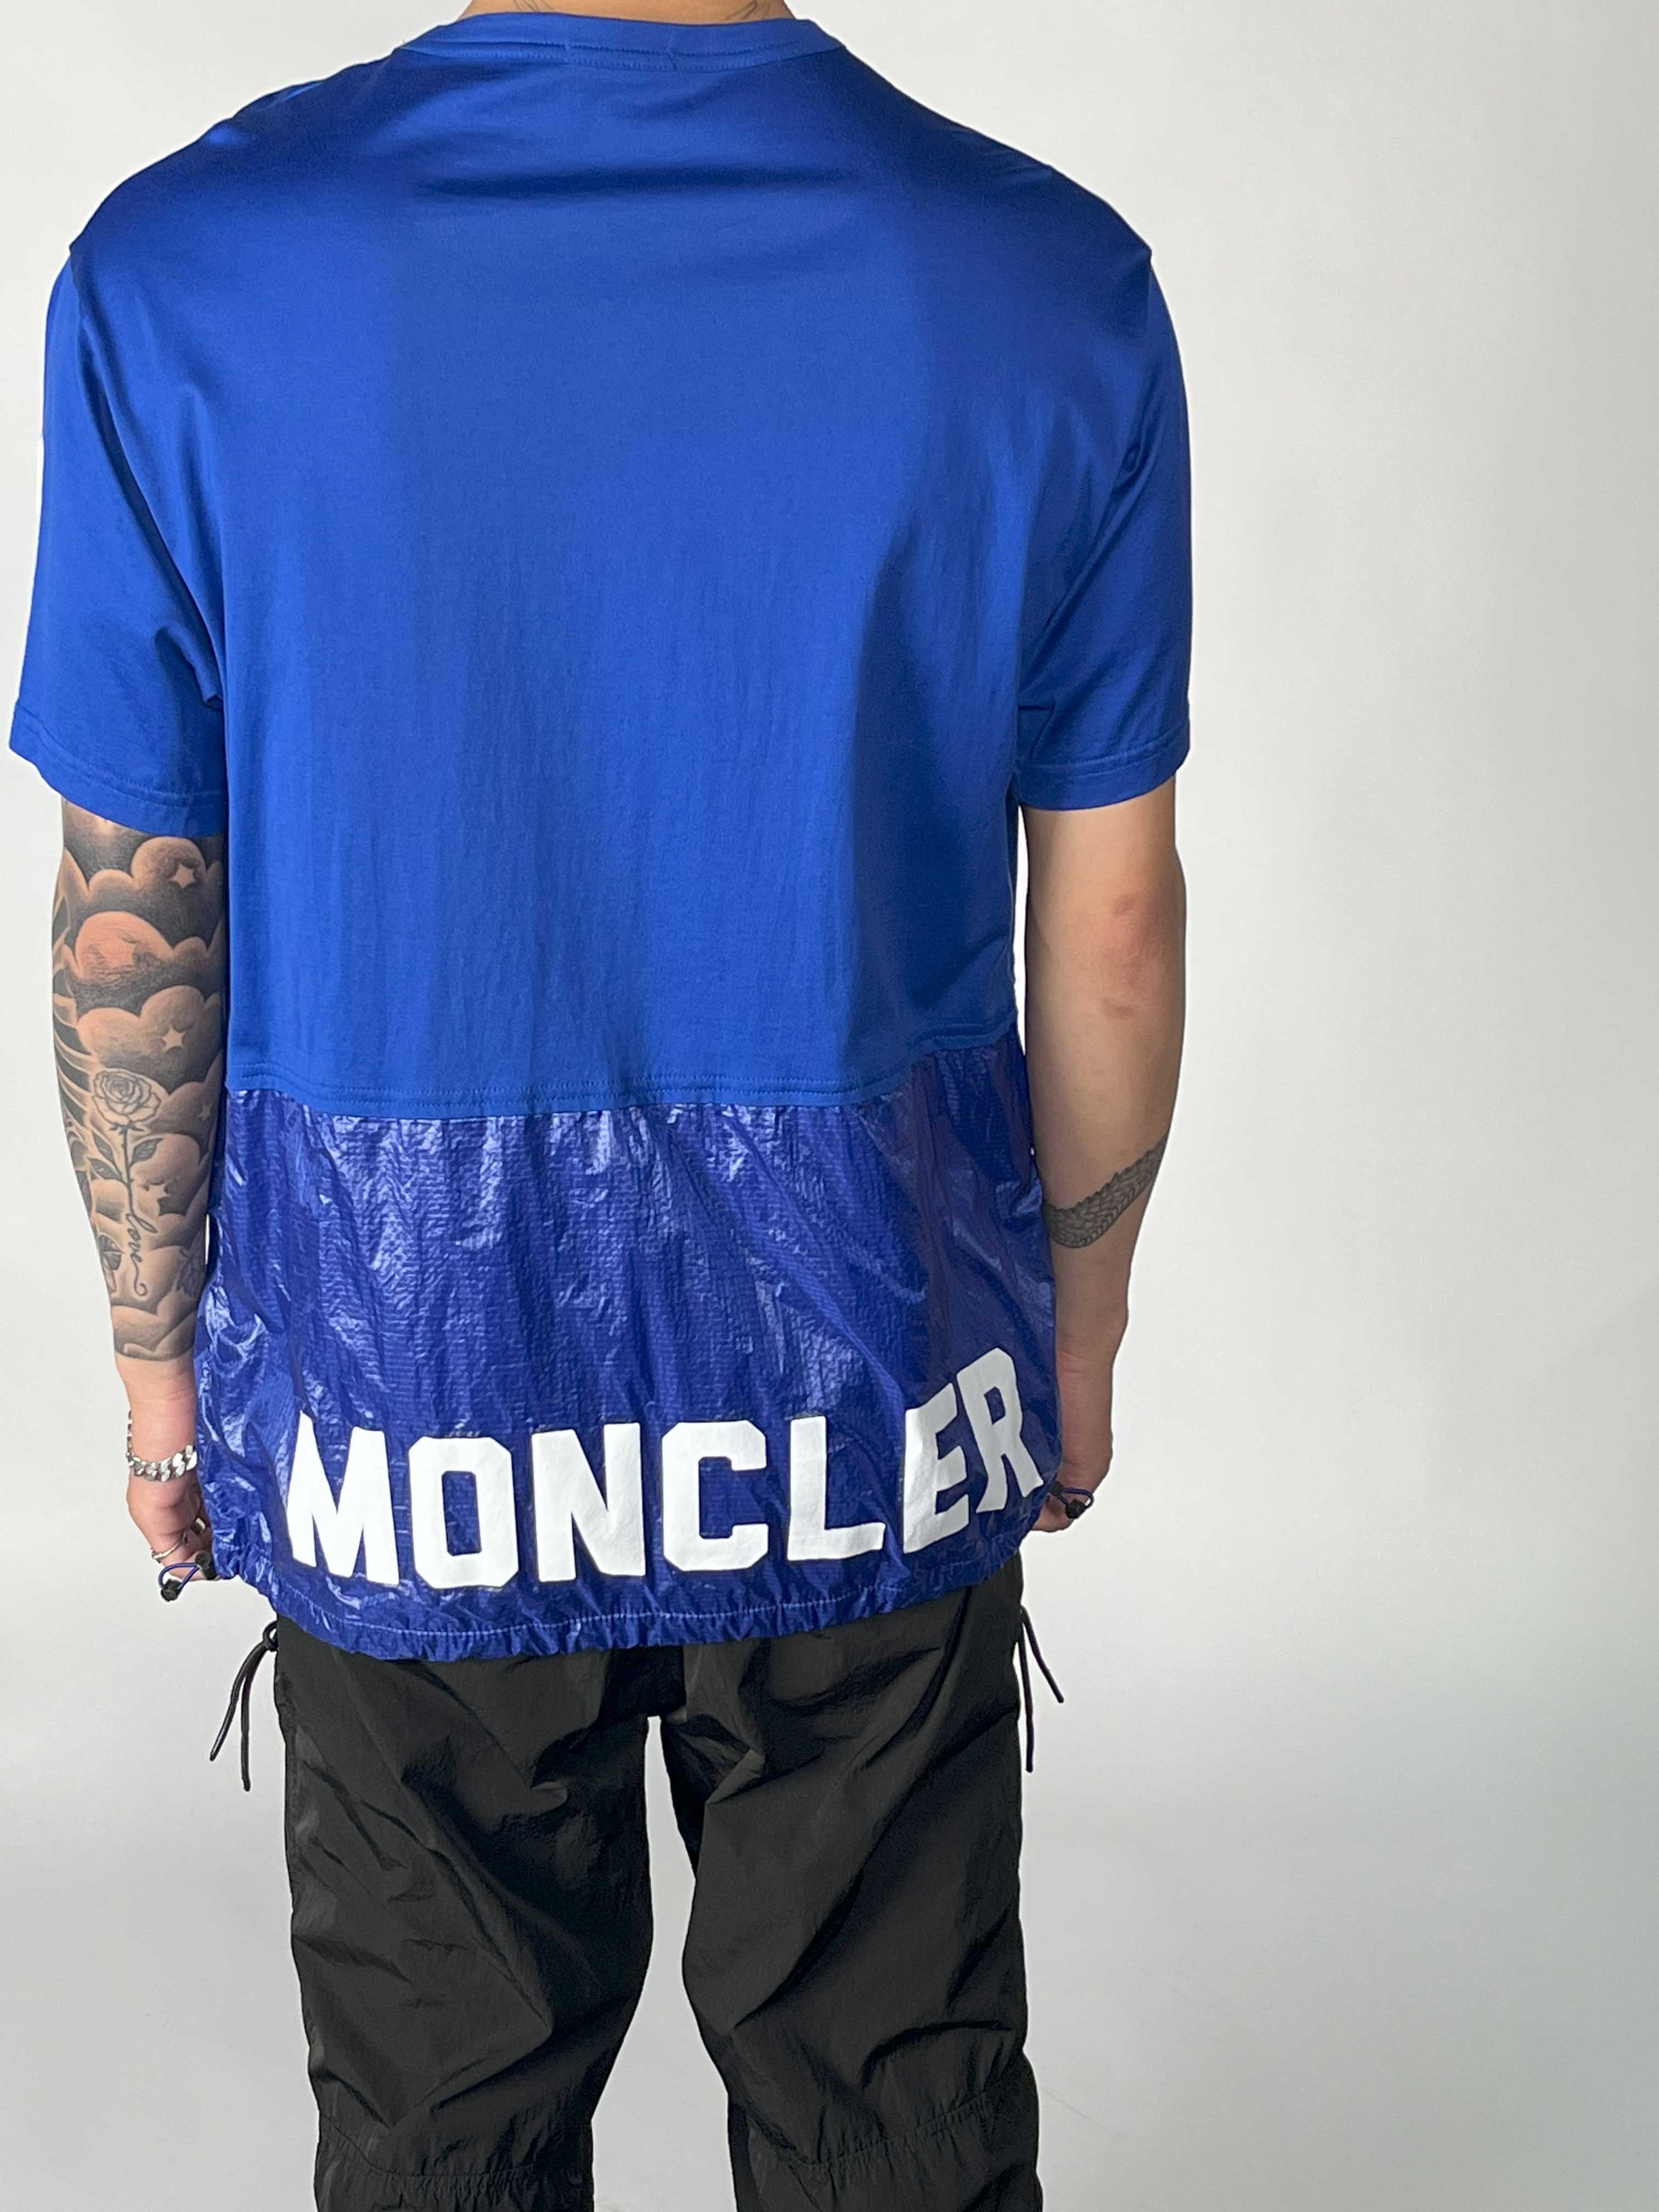 Moncler x Fragment MAGLIA S/S TEE